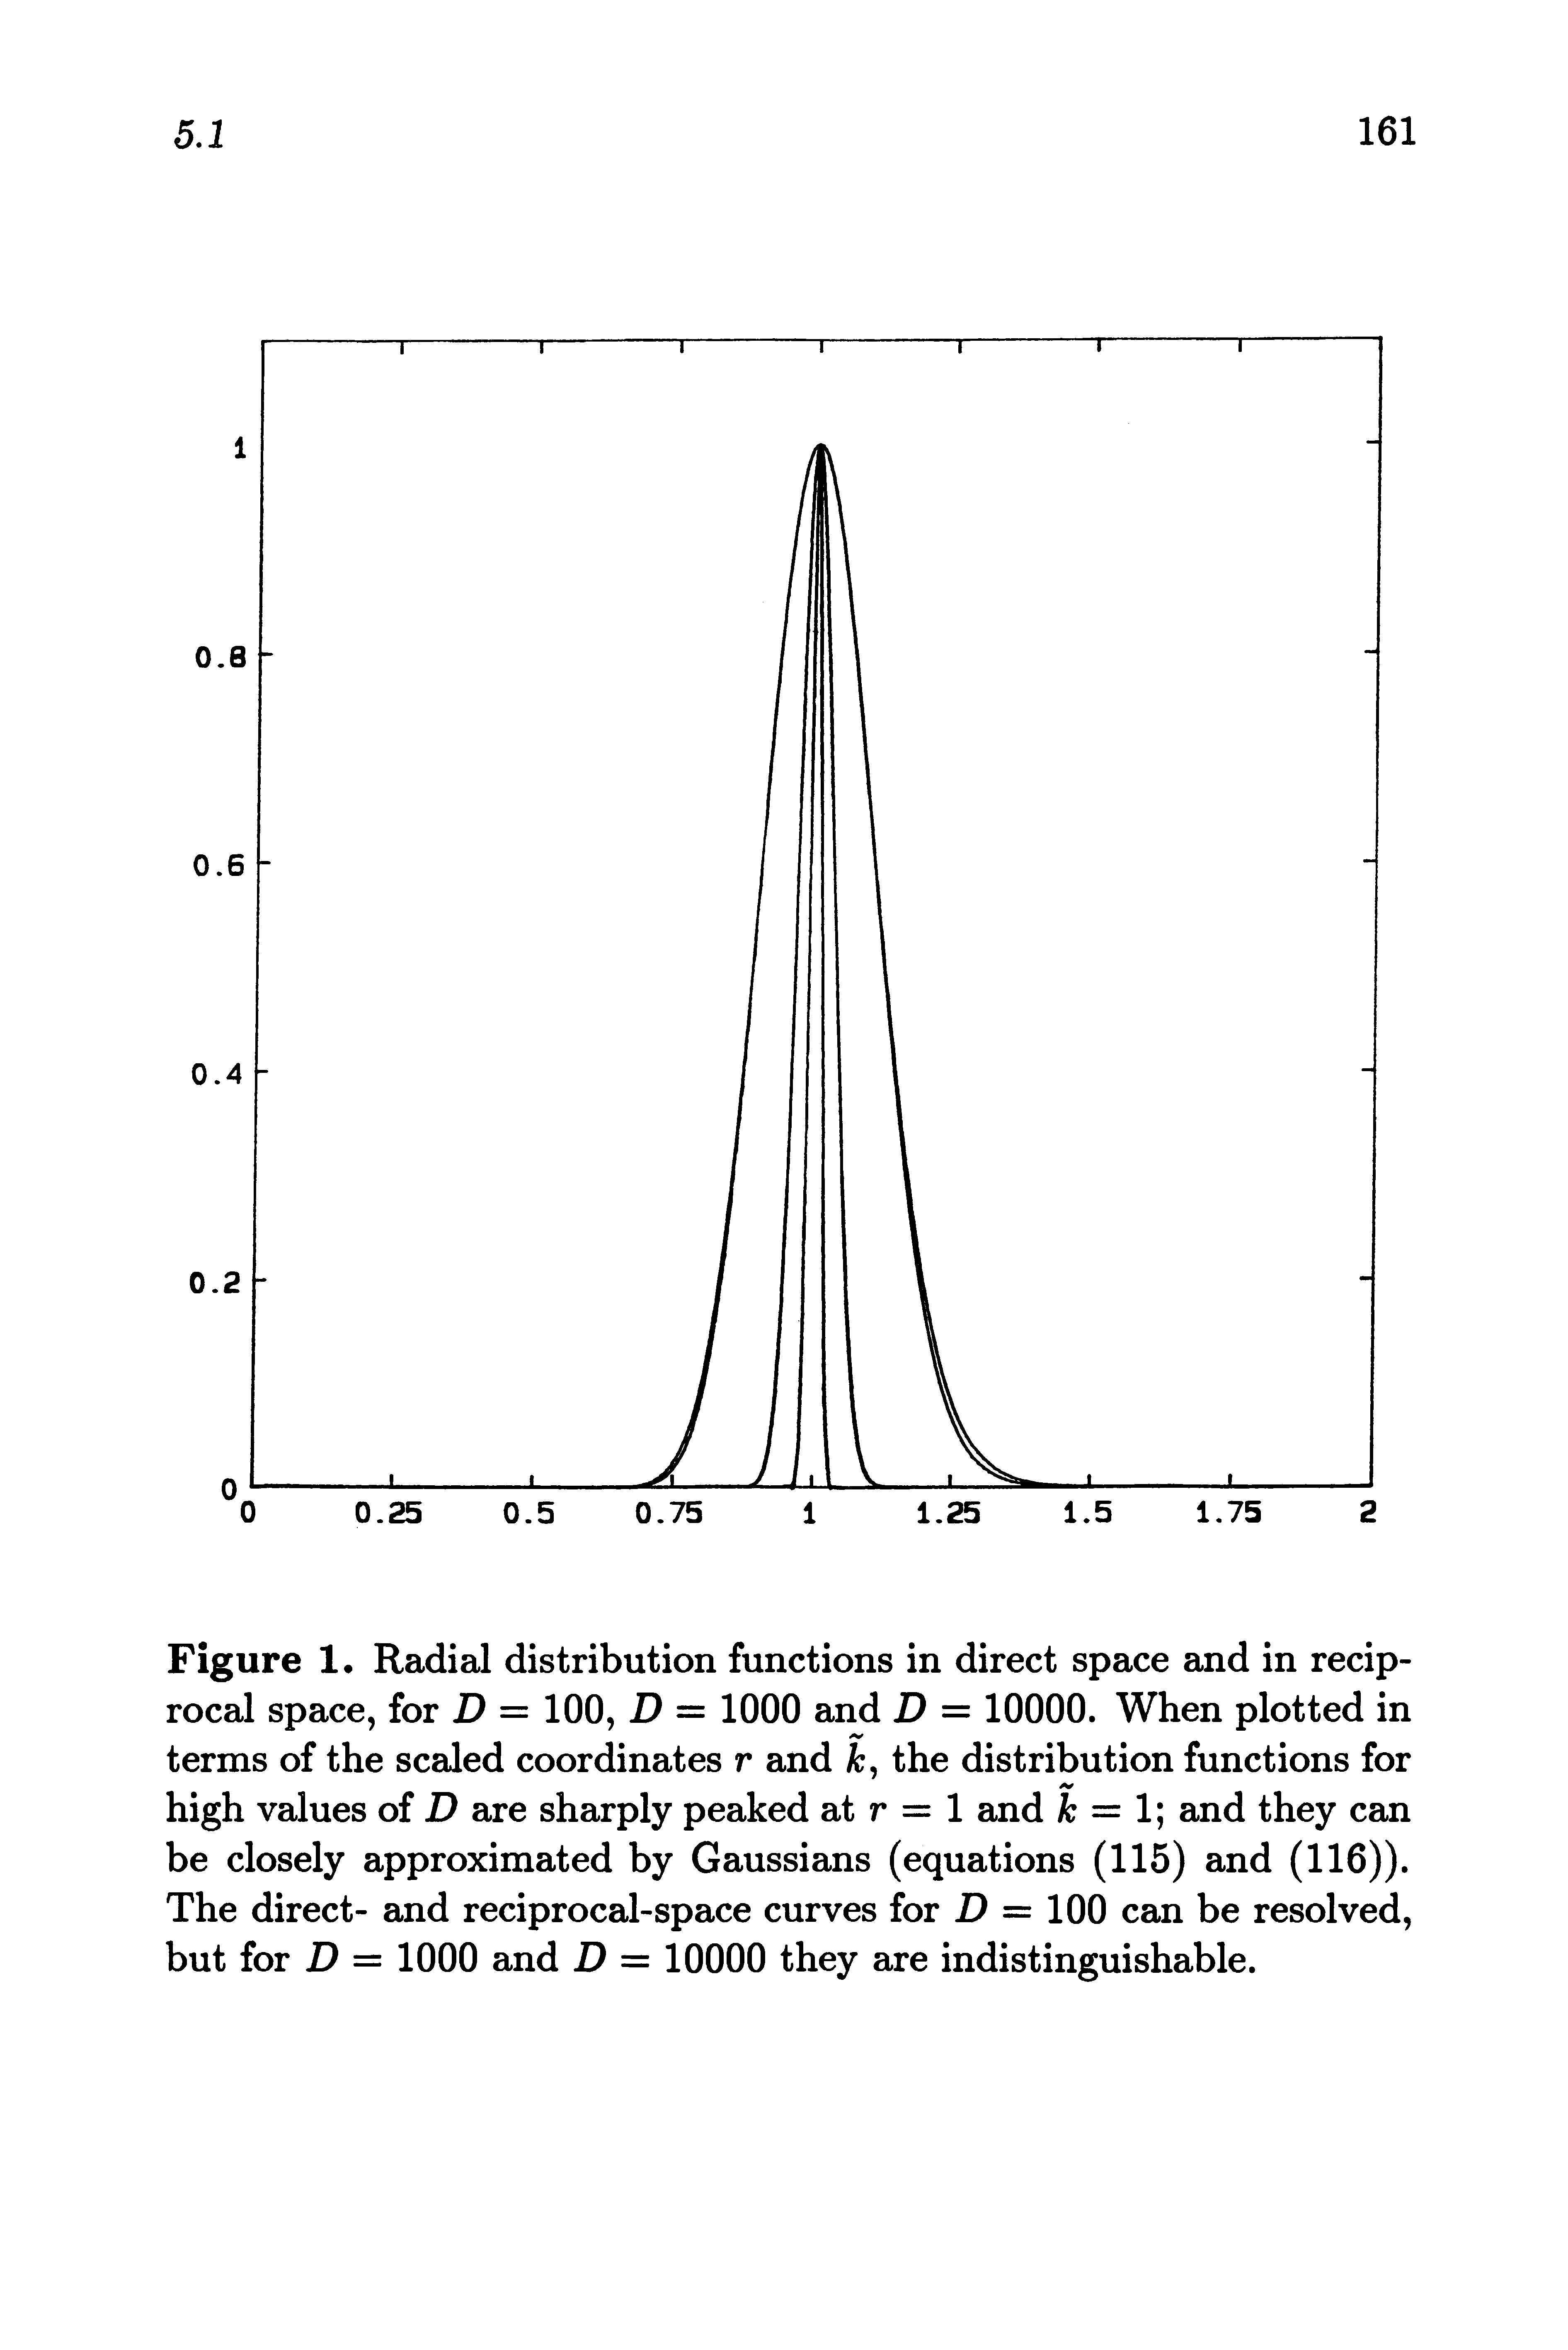 Figure 1. Radial distribution functions in direct space and in reciprocal space, for D = 100, D — 1000 and D = 10000. When plotted in terms of the scaled coordinates r and k, the distribution functions for high values of D are sharply peahed at r = 1 and k = 1 and they can be closely approximated by Gaussians (equations (115) and (116)). The direct- and reciprocal-space curves for i = 100 can be resolved, but for D = 1000 and D = 10000 they are indistinguishable.